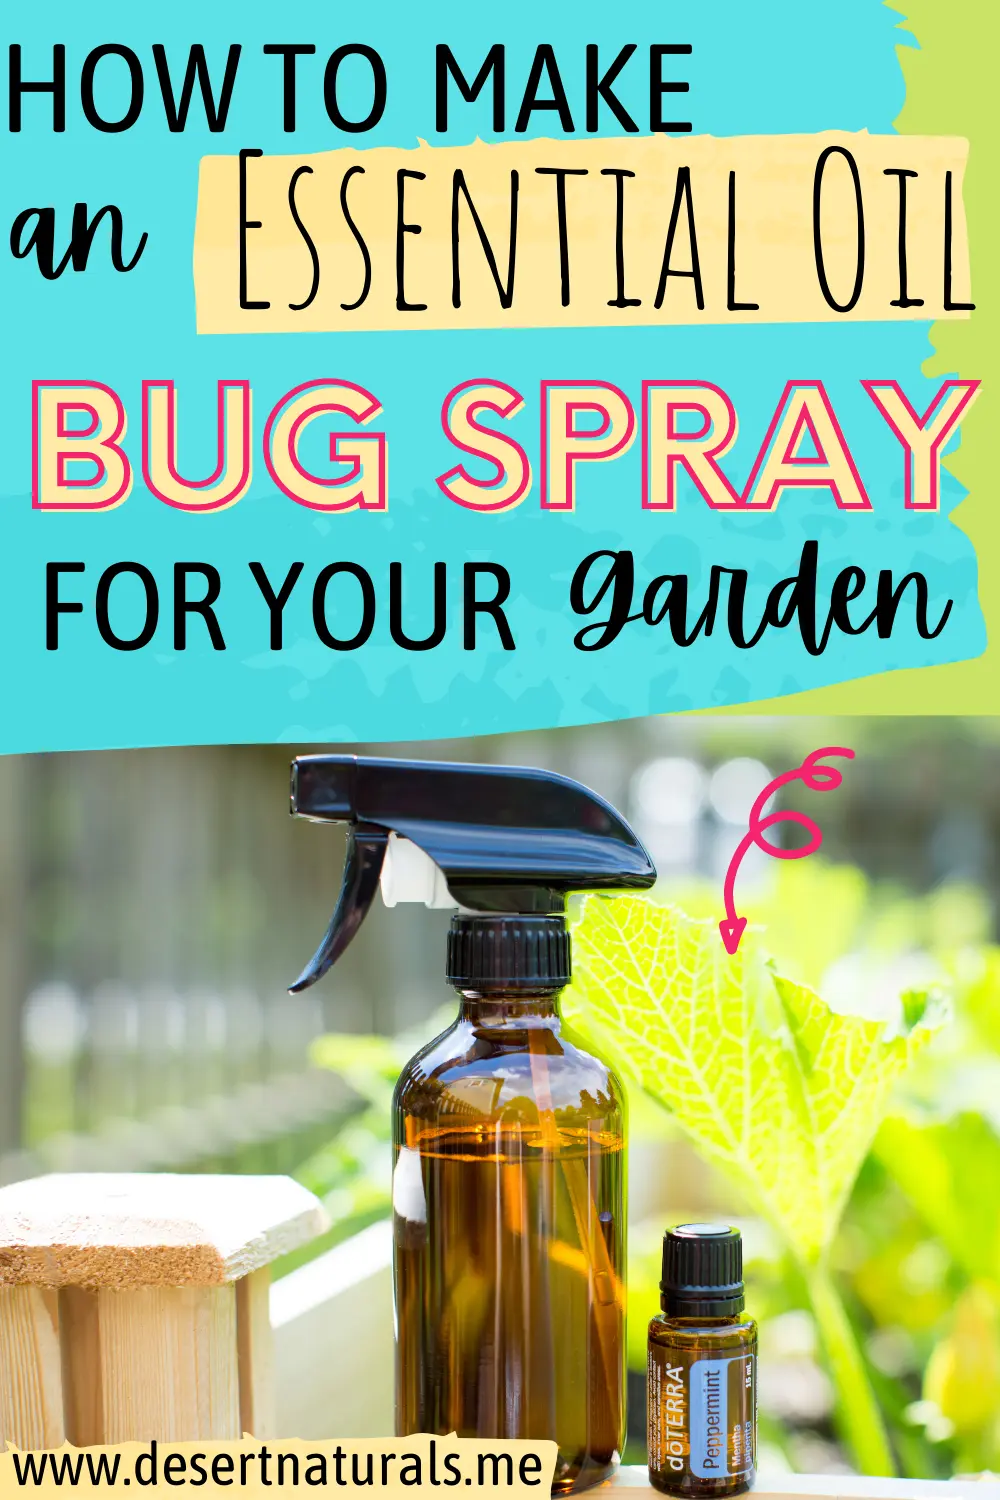 how to make an essential oil bug spray for your garden recipe